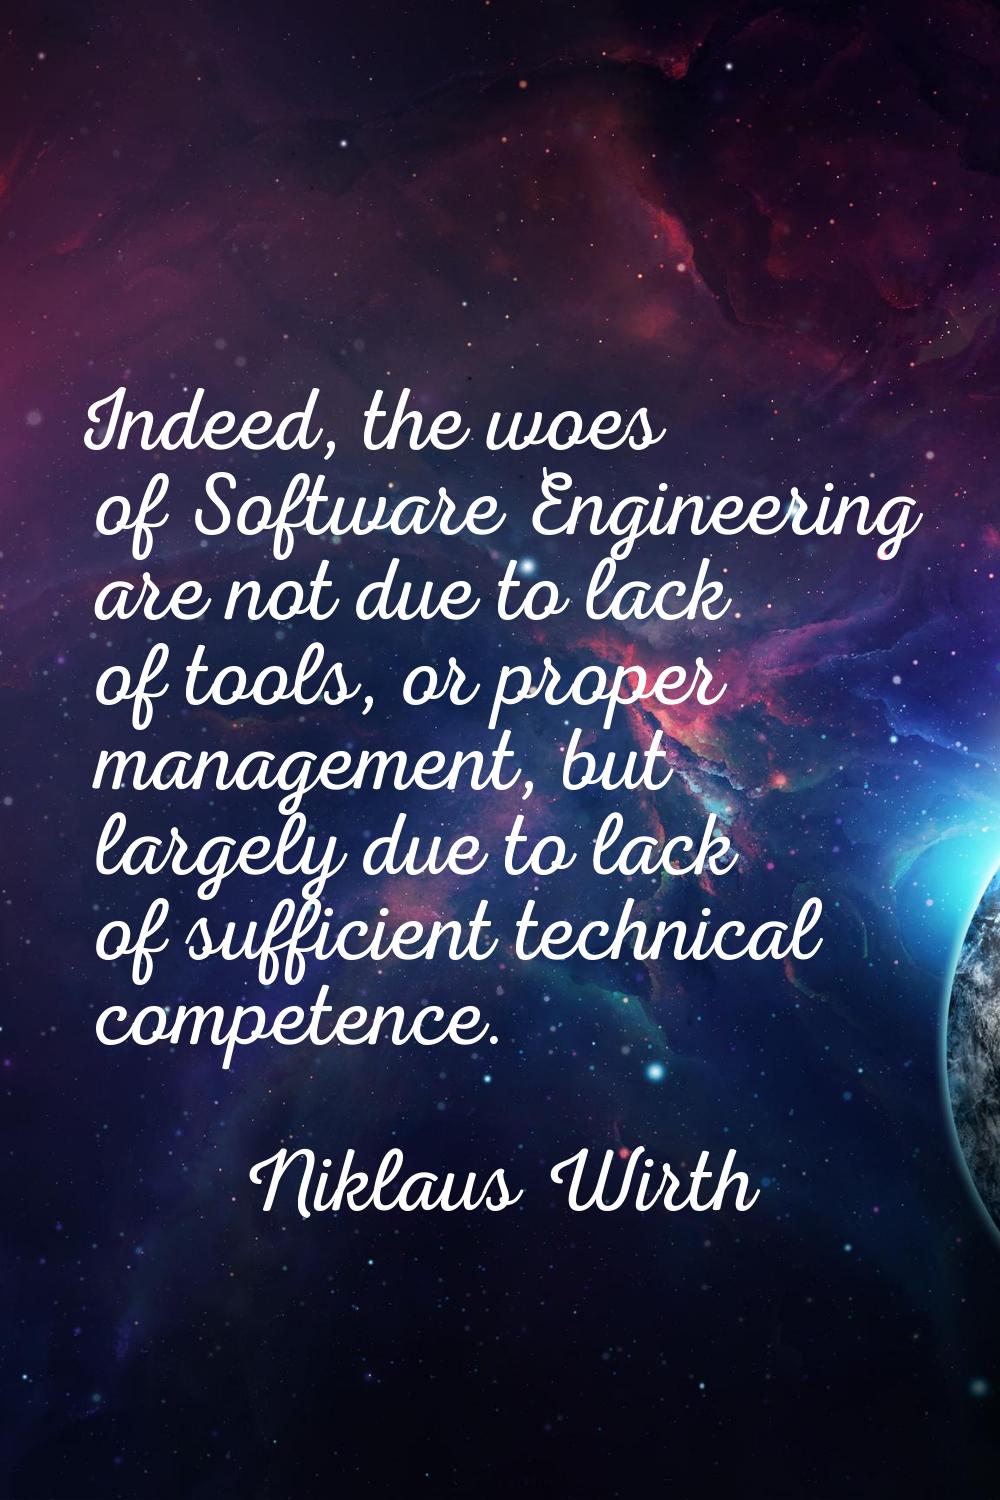 Indeed, the woes of Software Engineering are not due to lack of tools, or proper management, but la